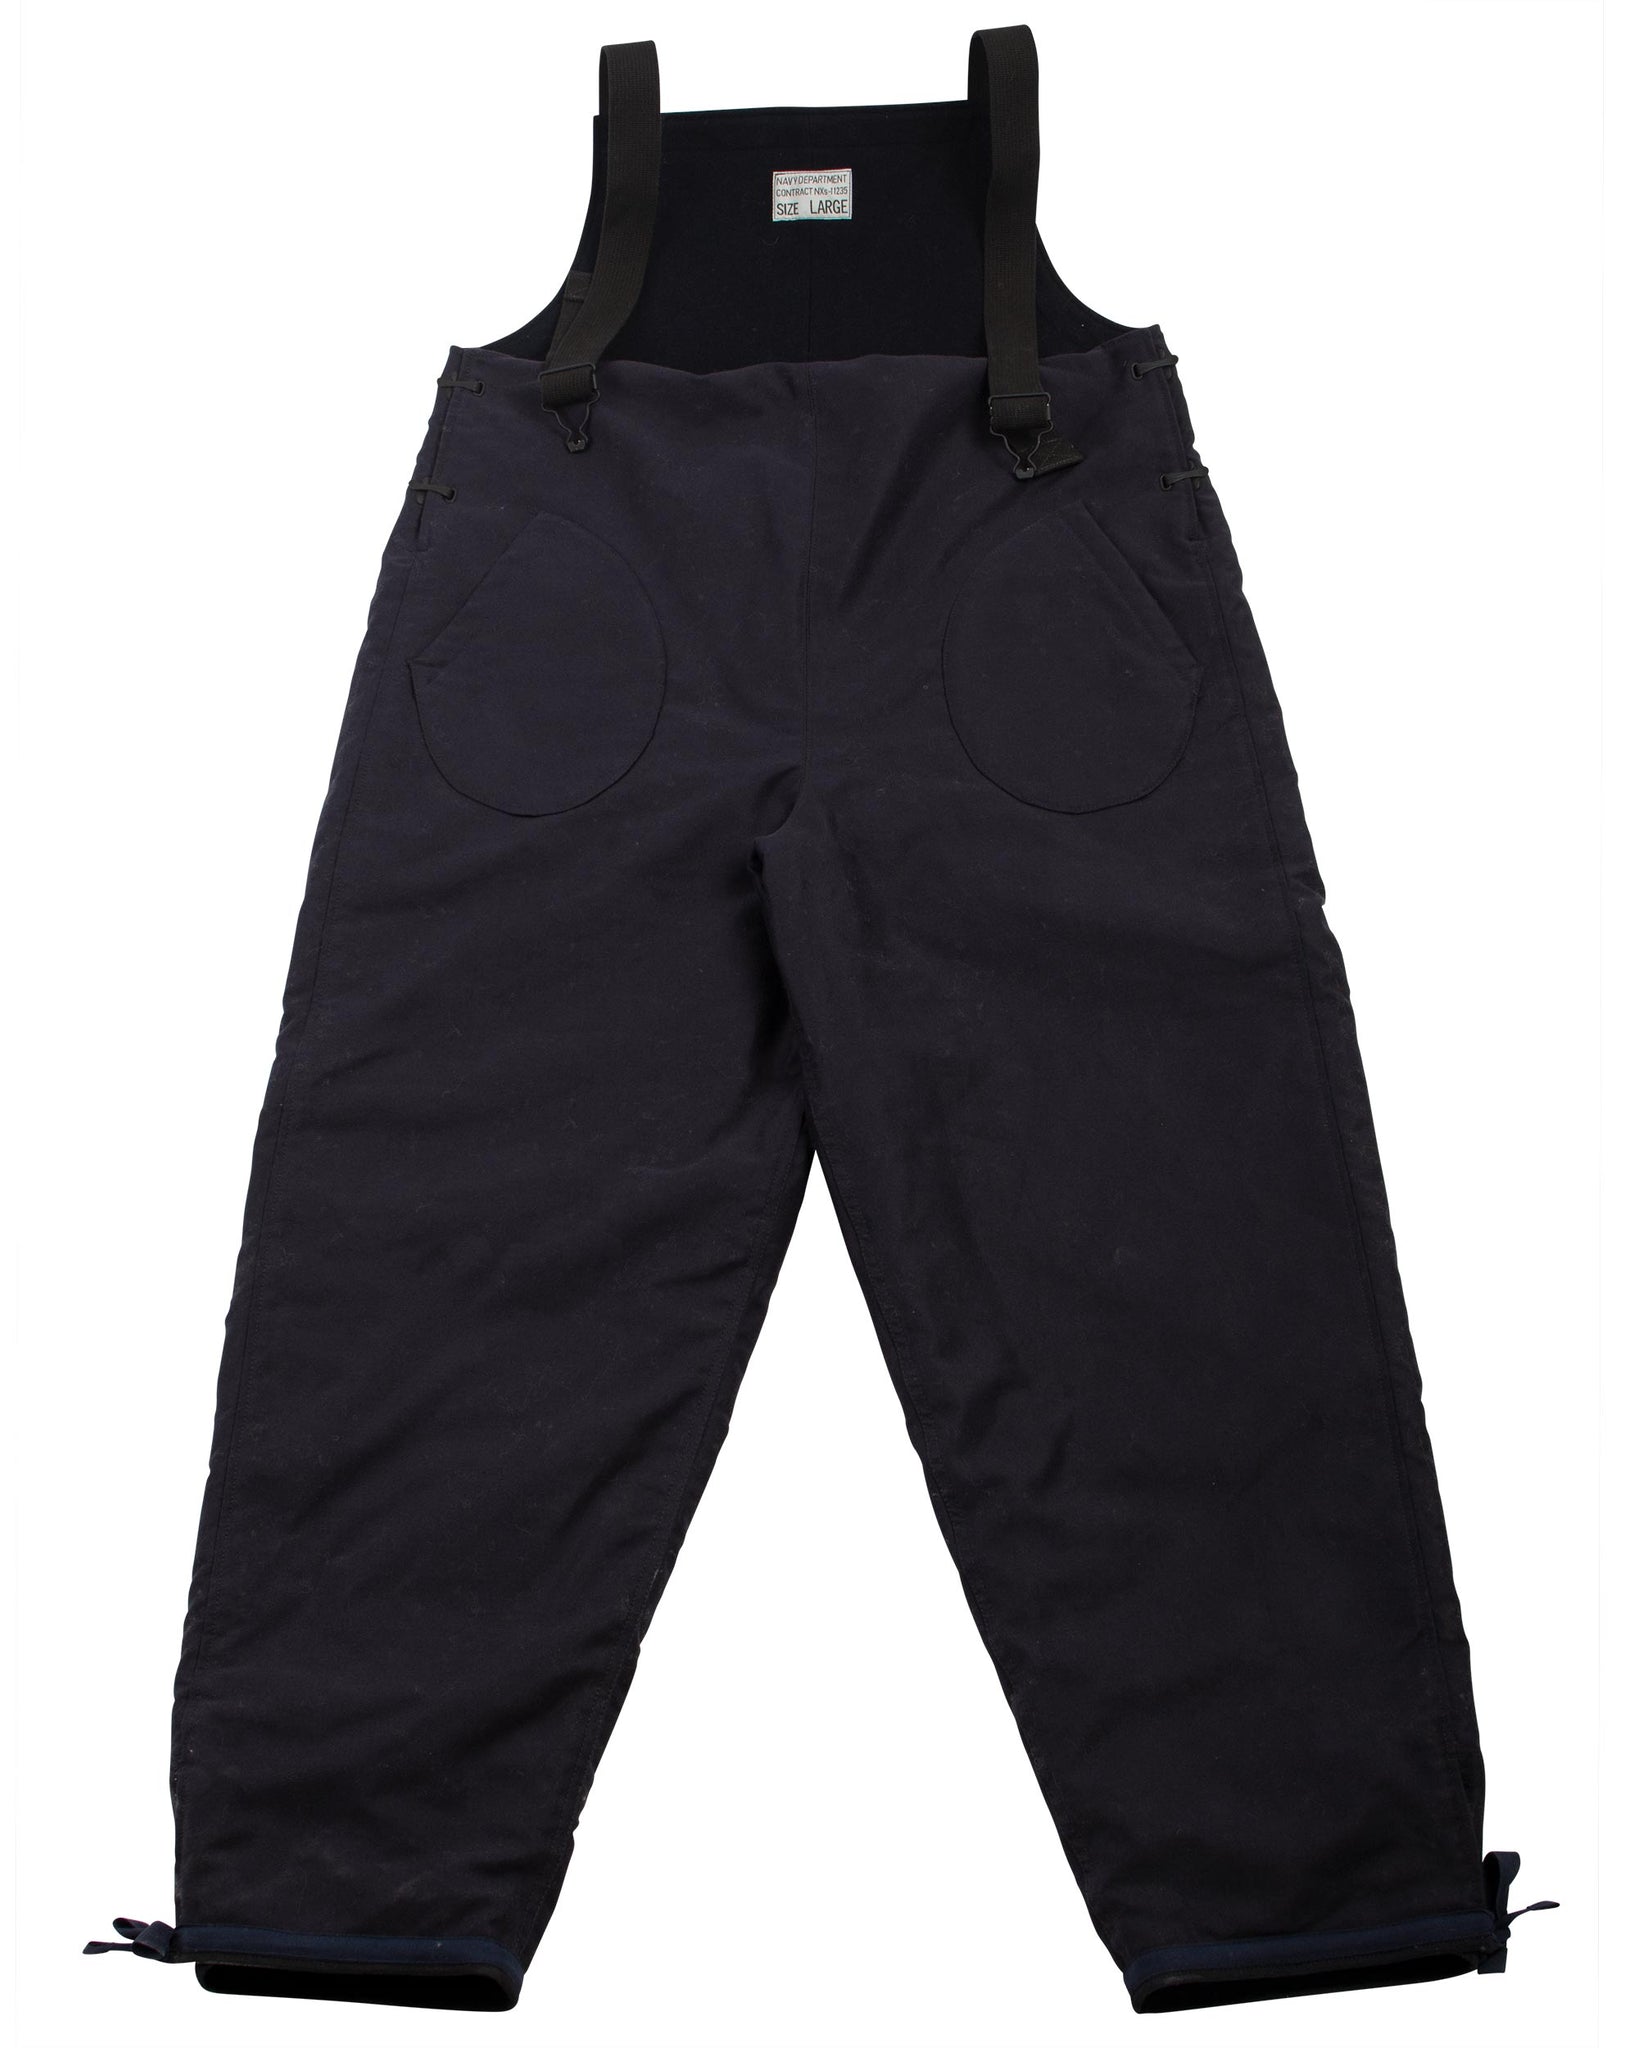 The Real McCoy's MP21102 Special Winter Clothing Trousers Navy